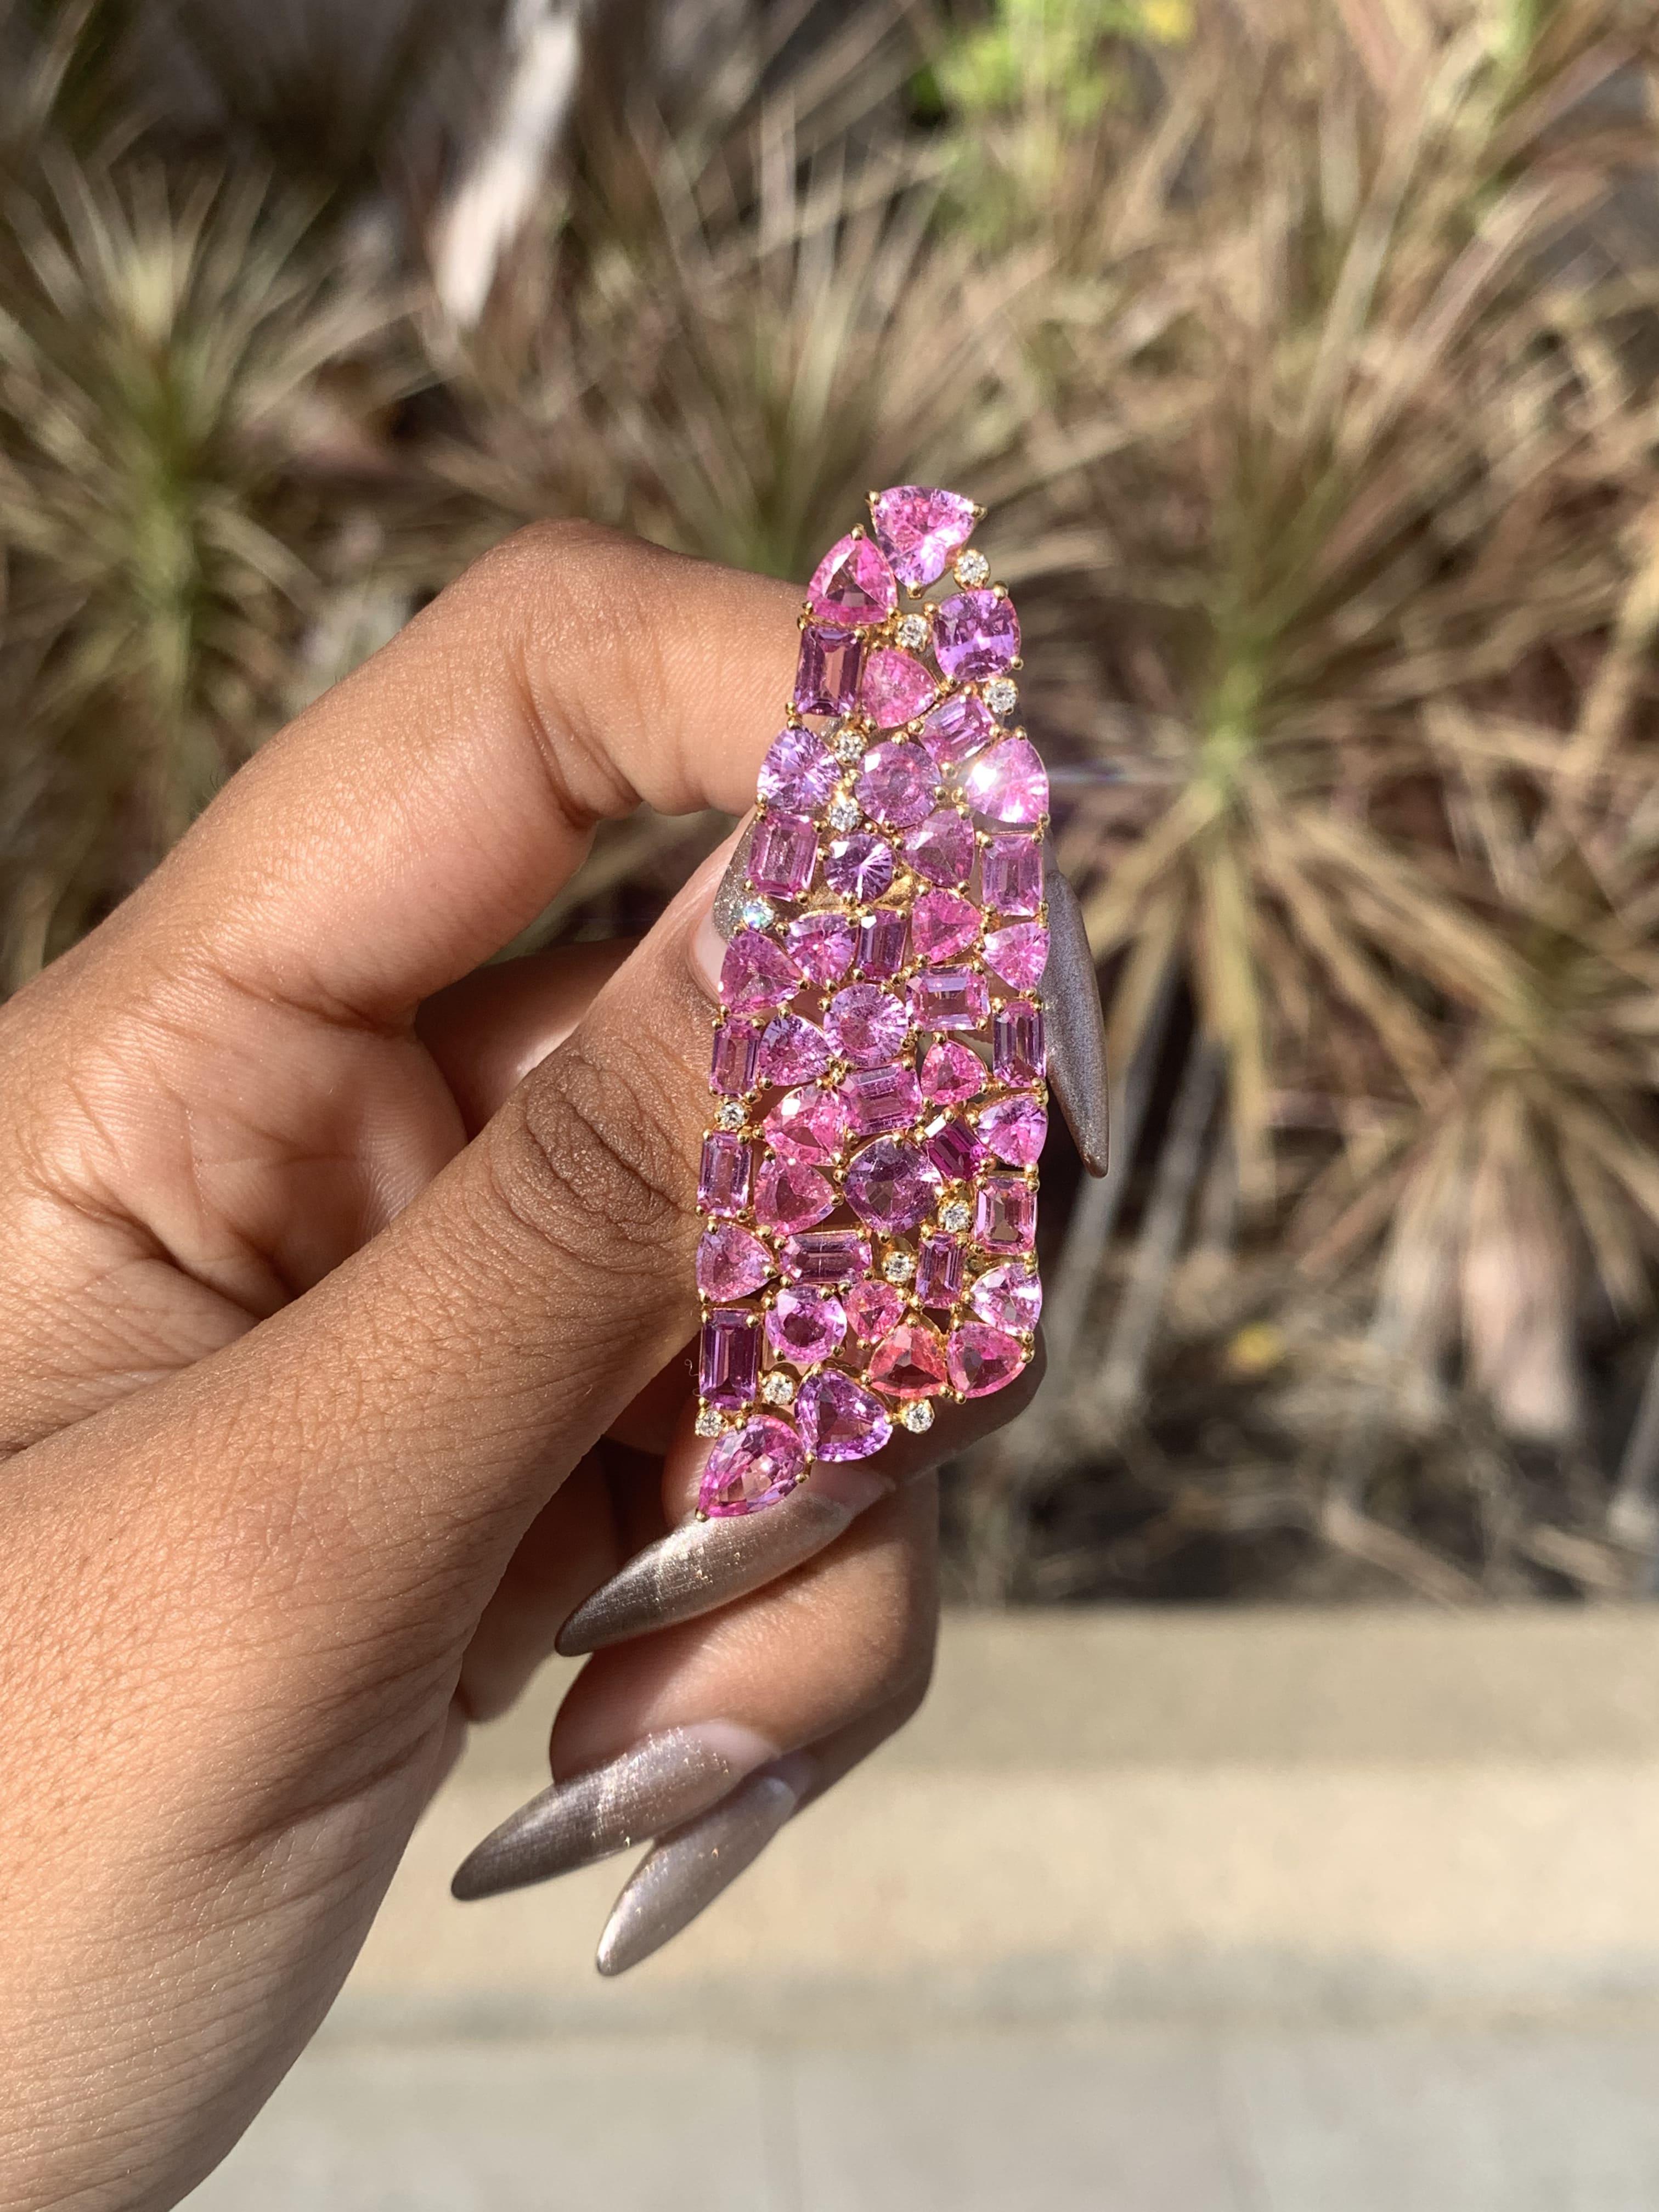 With its exceptional design and a symphony of mesmerizing pink hues, this one-of-a-kind jewelry piece is destined to leave you spellbound.

The brooch features stunning 12.97-carat pink sapphires, meticulously handpicked for their exceptional color